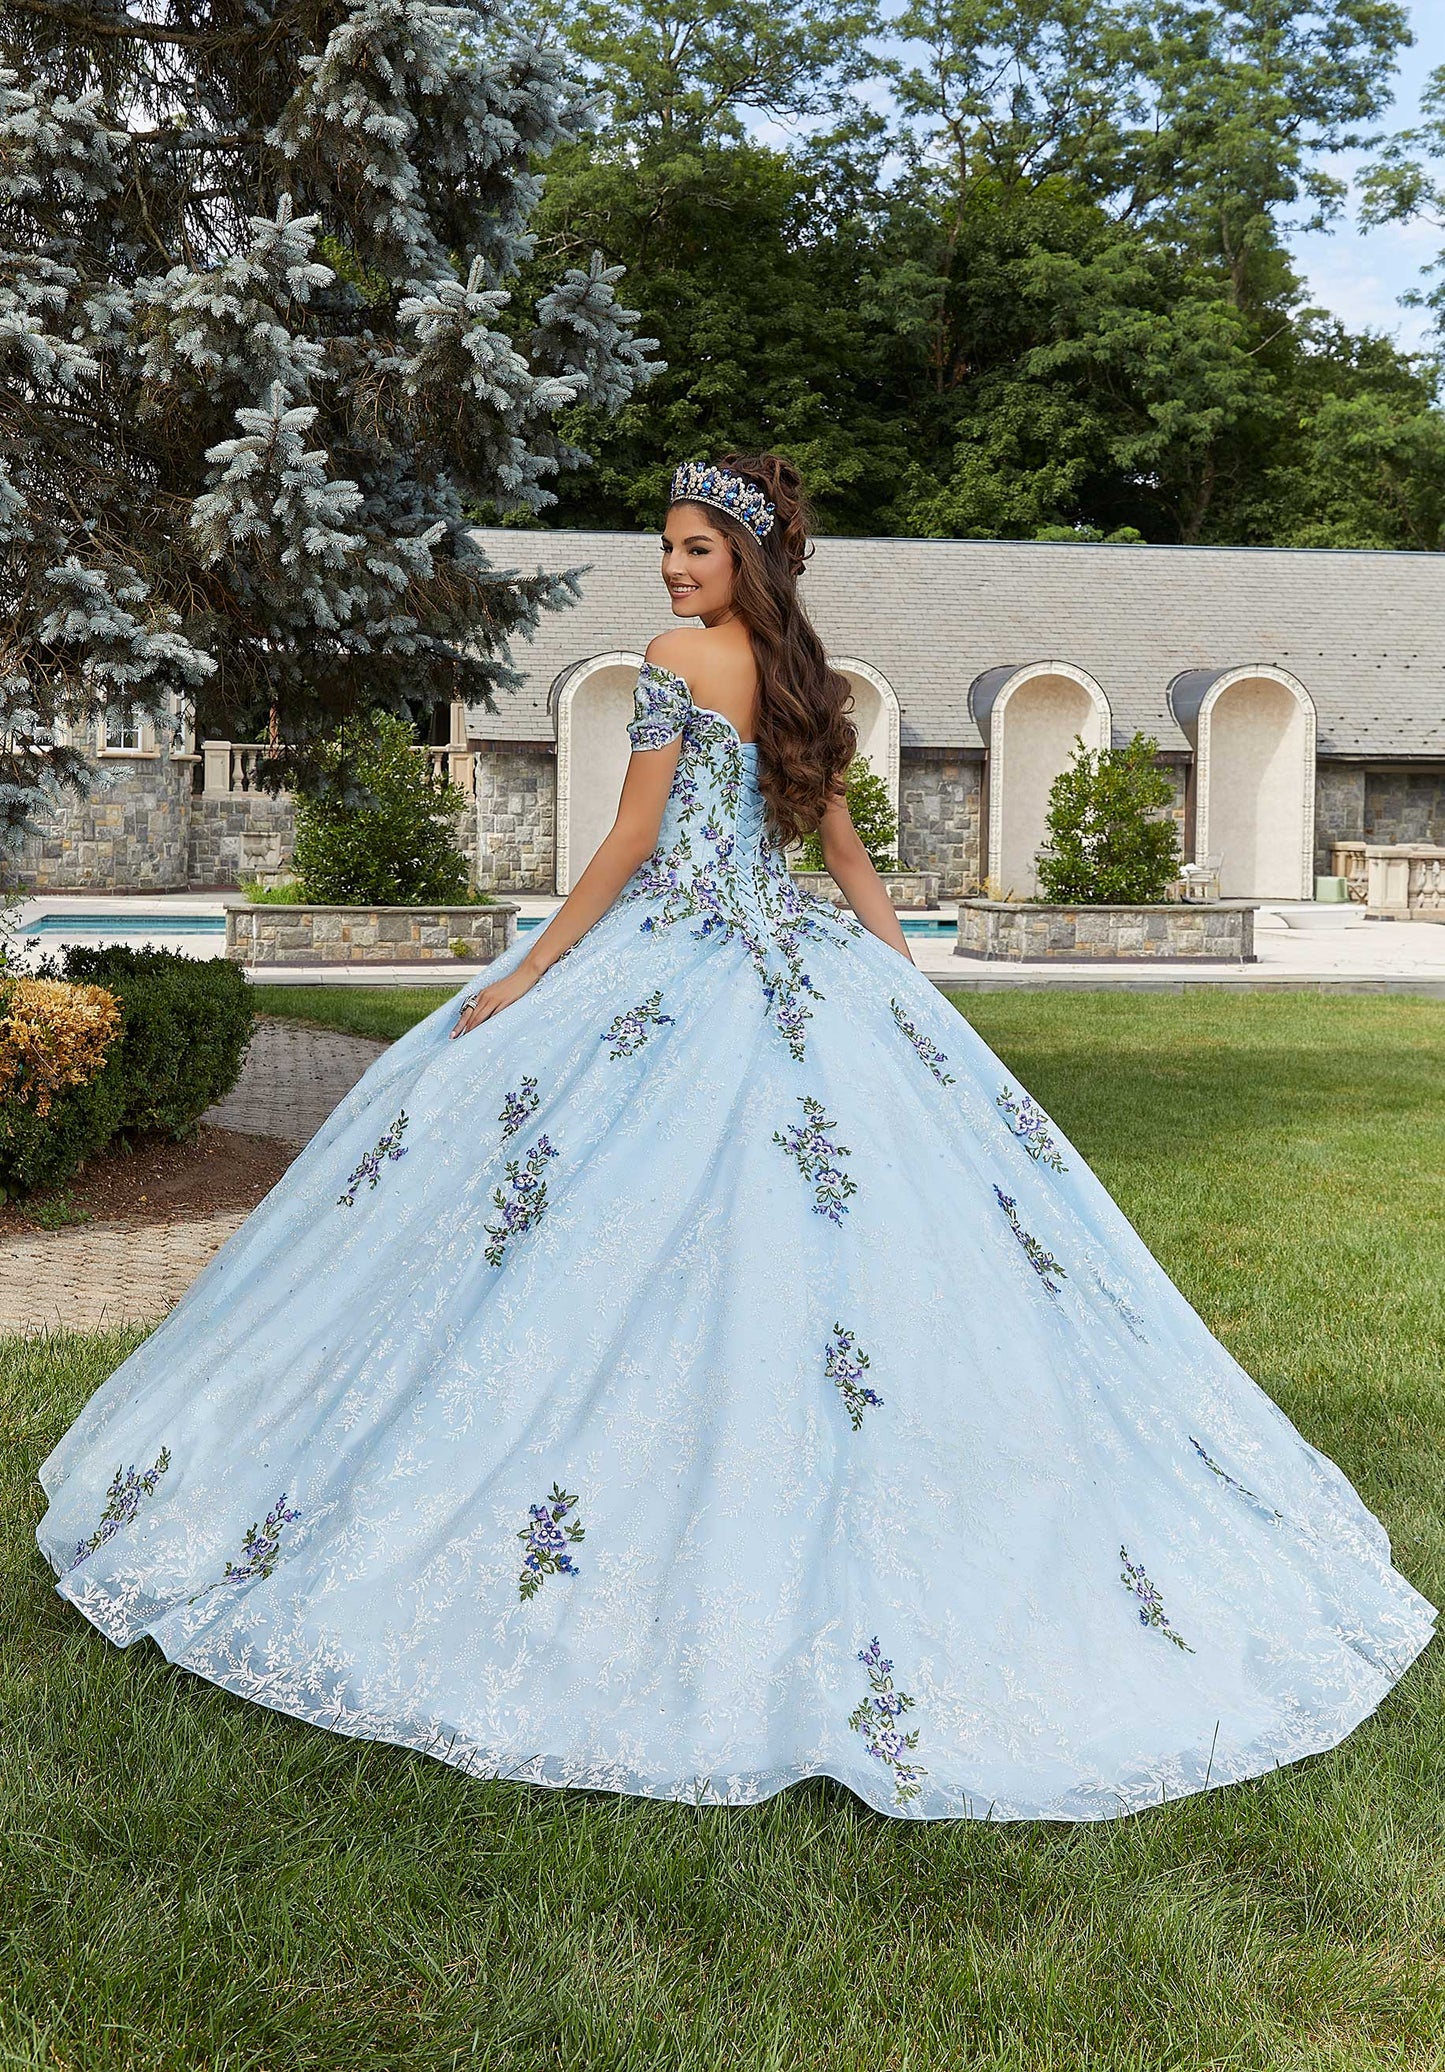 11284 | Contrasting Floral Embroidered Quinceañera Dress